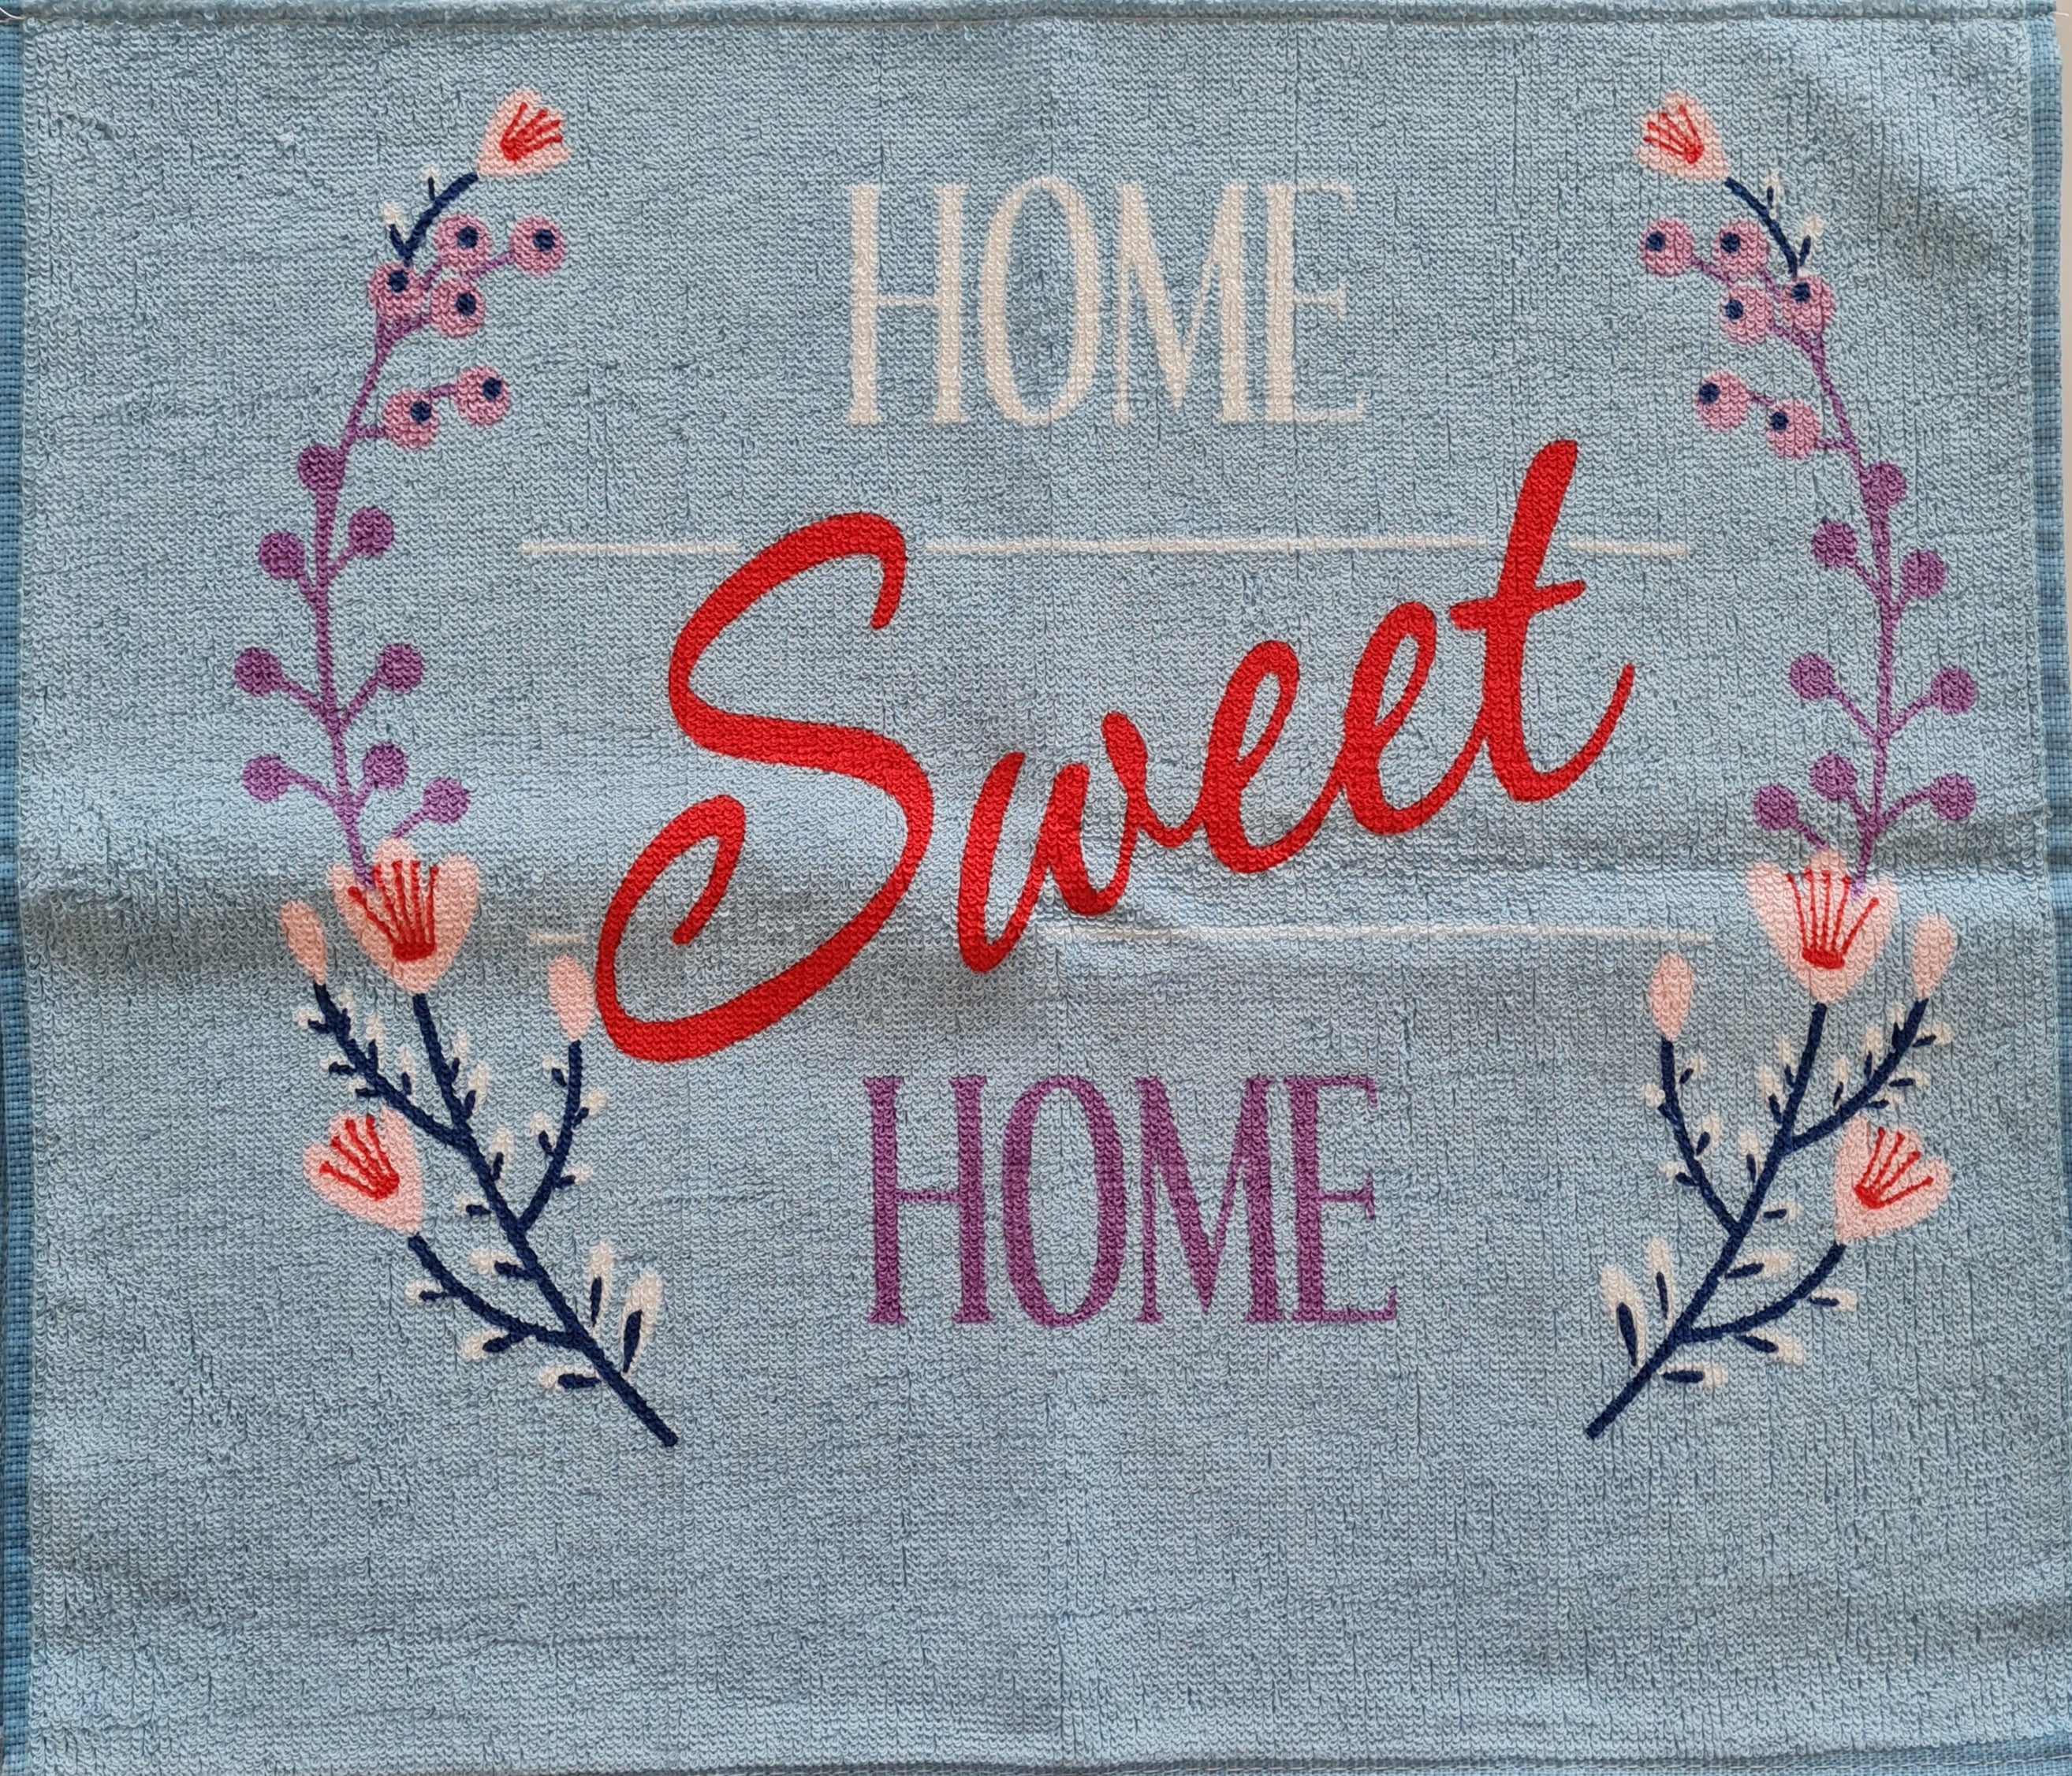 Crochet topped hanging kitchen hand towel - Home Sweet Home